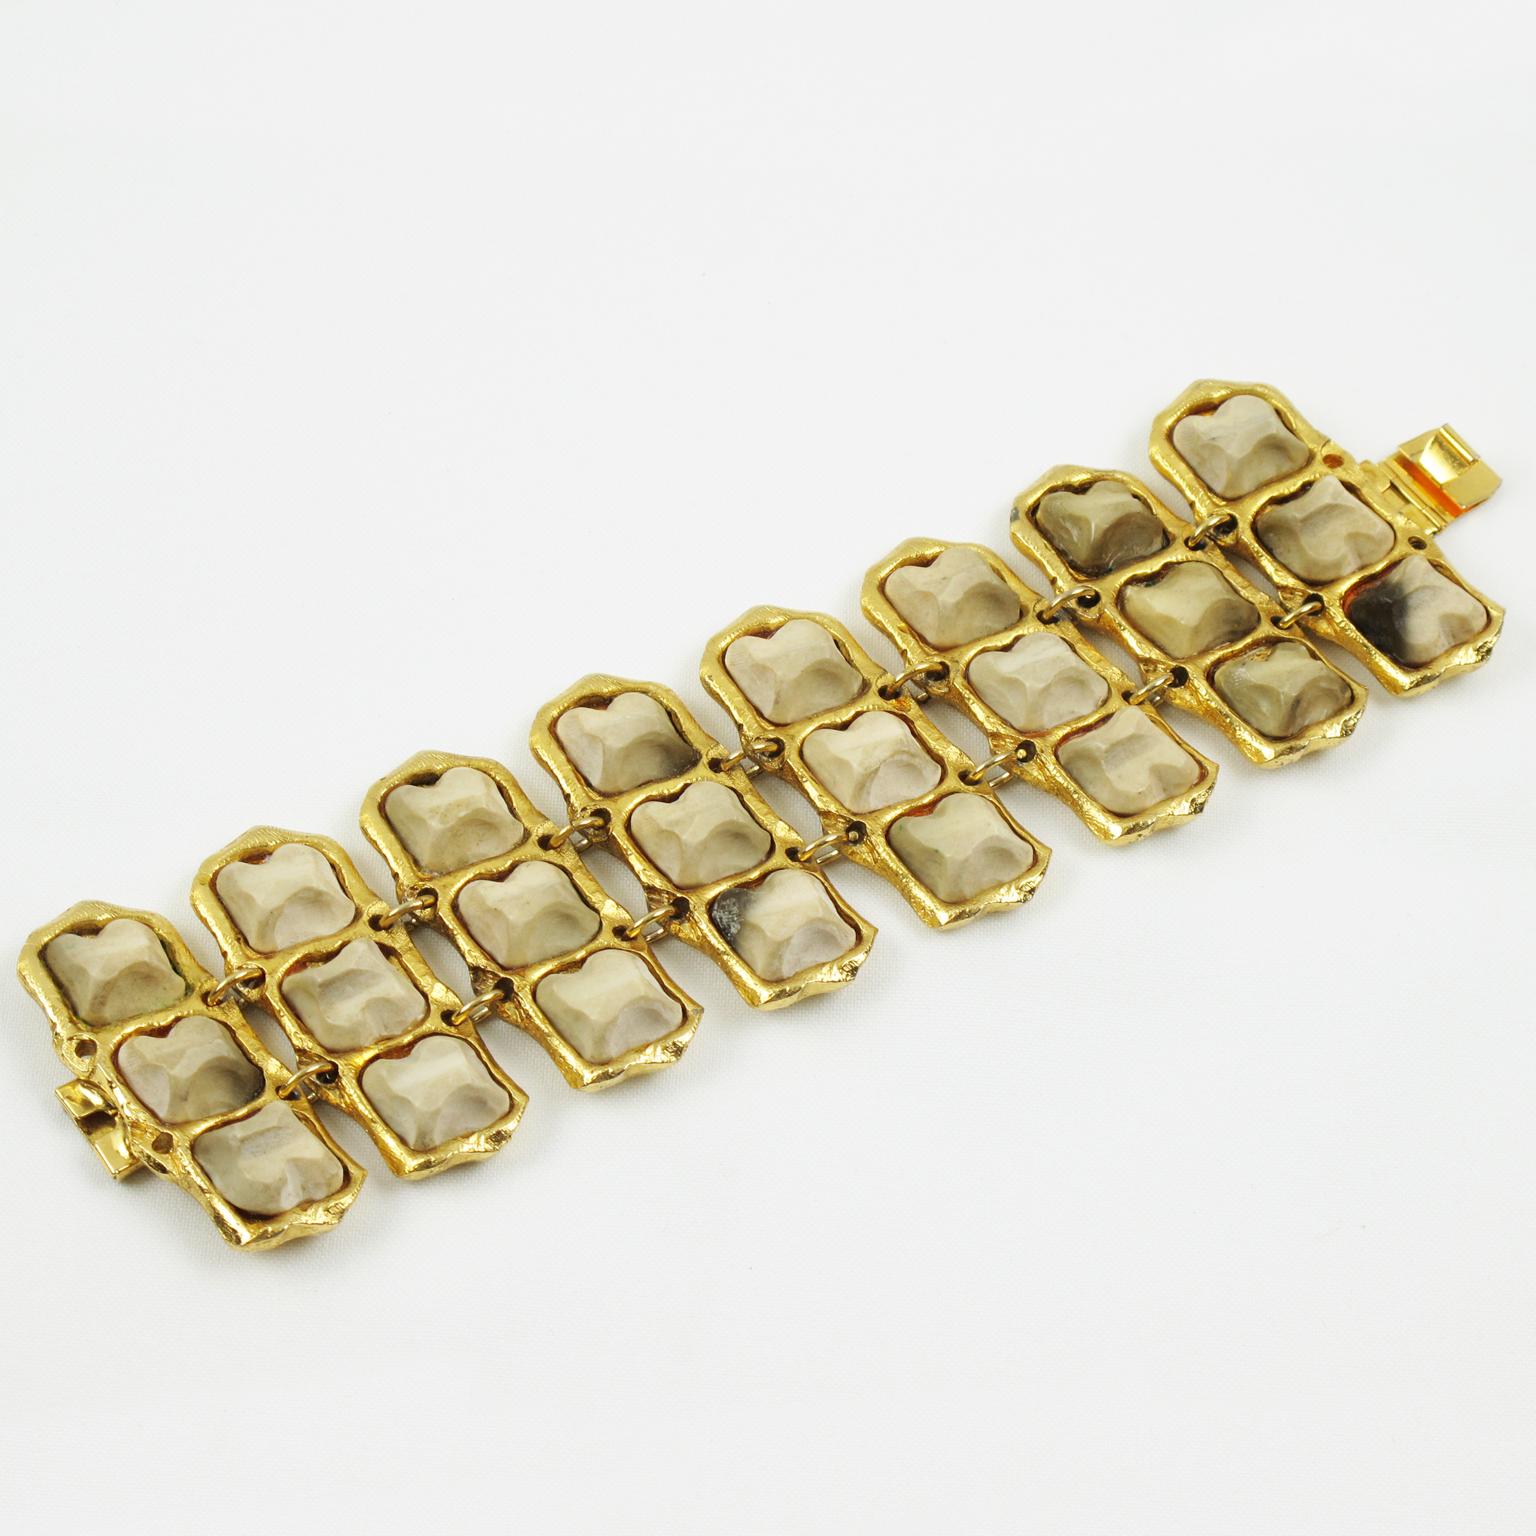 This spectacular Kalinger Paris link bracelet features an oversized and dimensional gilt metal framing with textured, topped with carved resin pebbles in marble-like texture. The metal framing has a satin finish aspect. The resin stones come in a